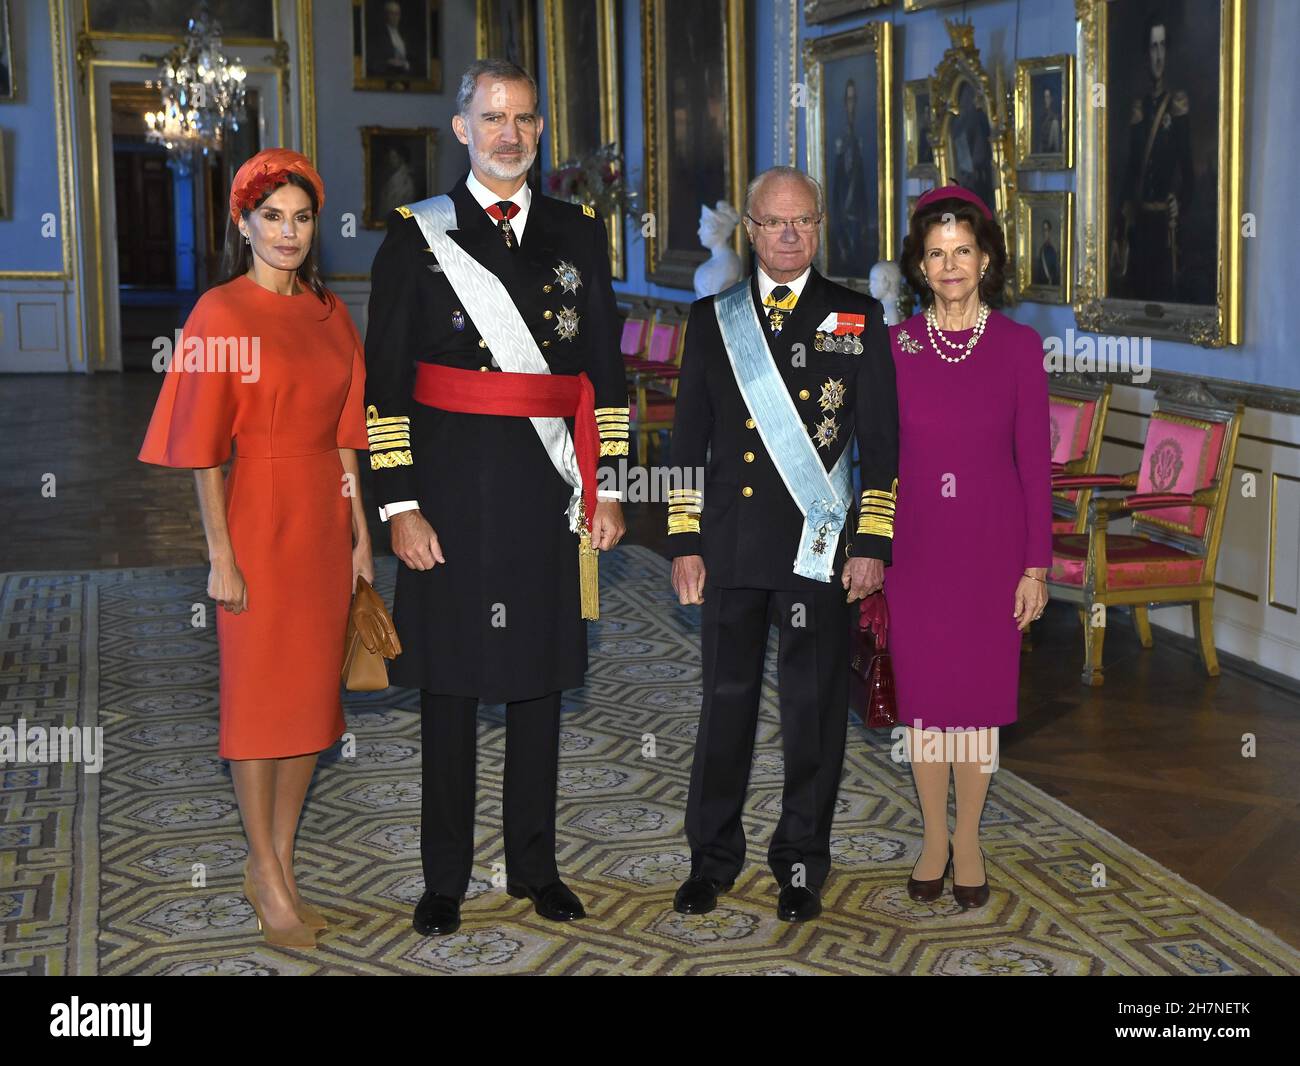 Stockholm, Sweden, 24 November, 2021. Queen Letizia, King Felipe, King Carl  Gustaf and Queen Silvia at the official welcome ceremony at the Royal  Palace in Stockholm, Sweden, 24 November, 2021. The Spanish